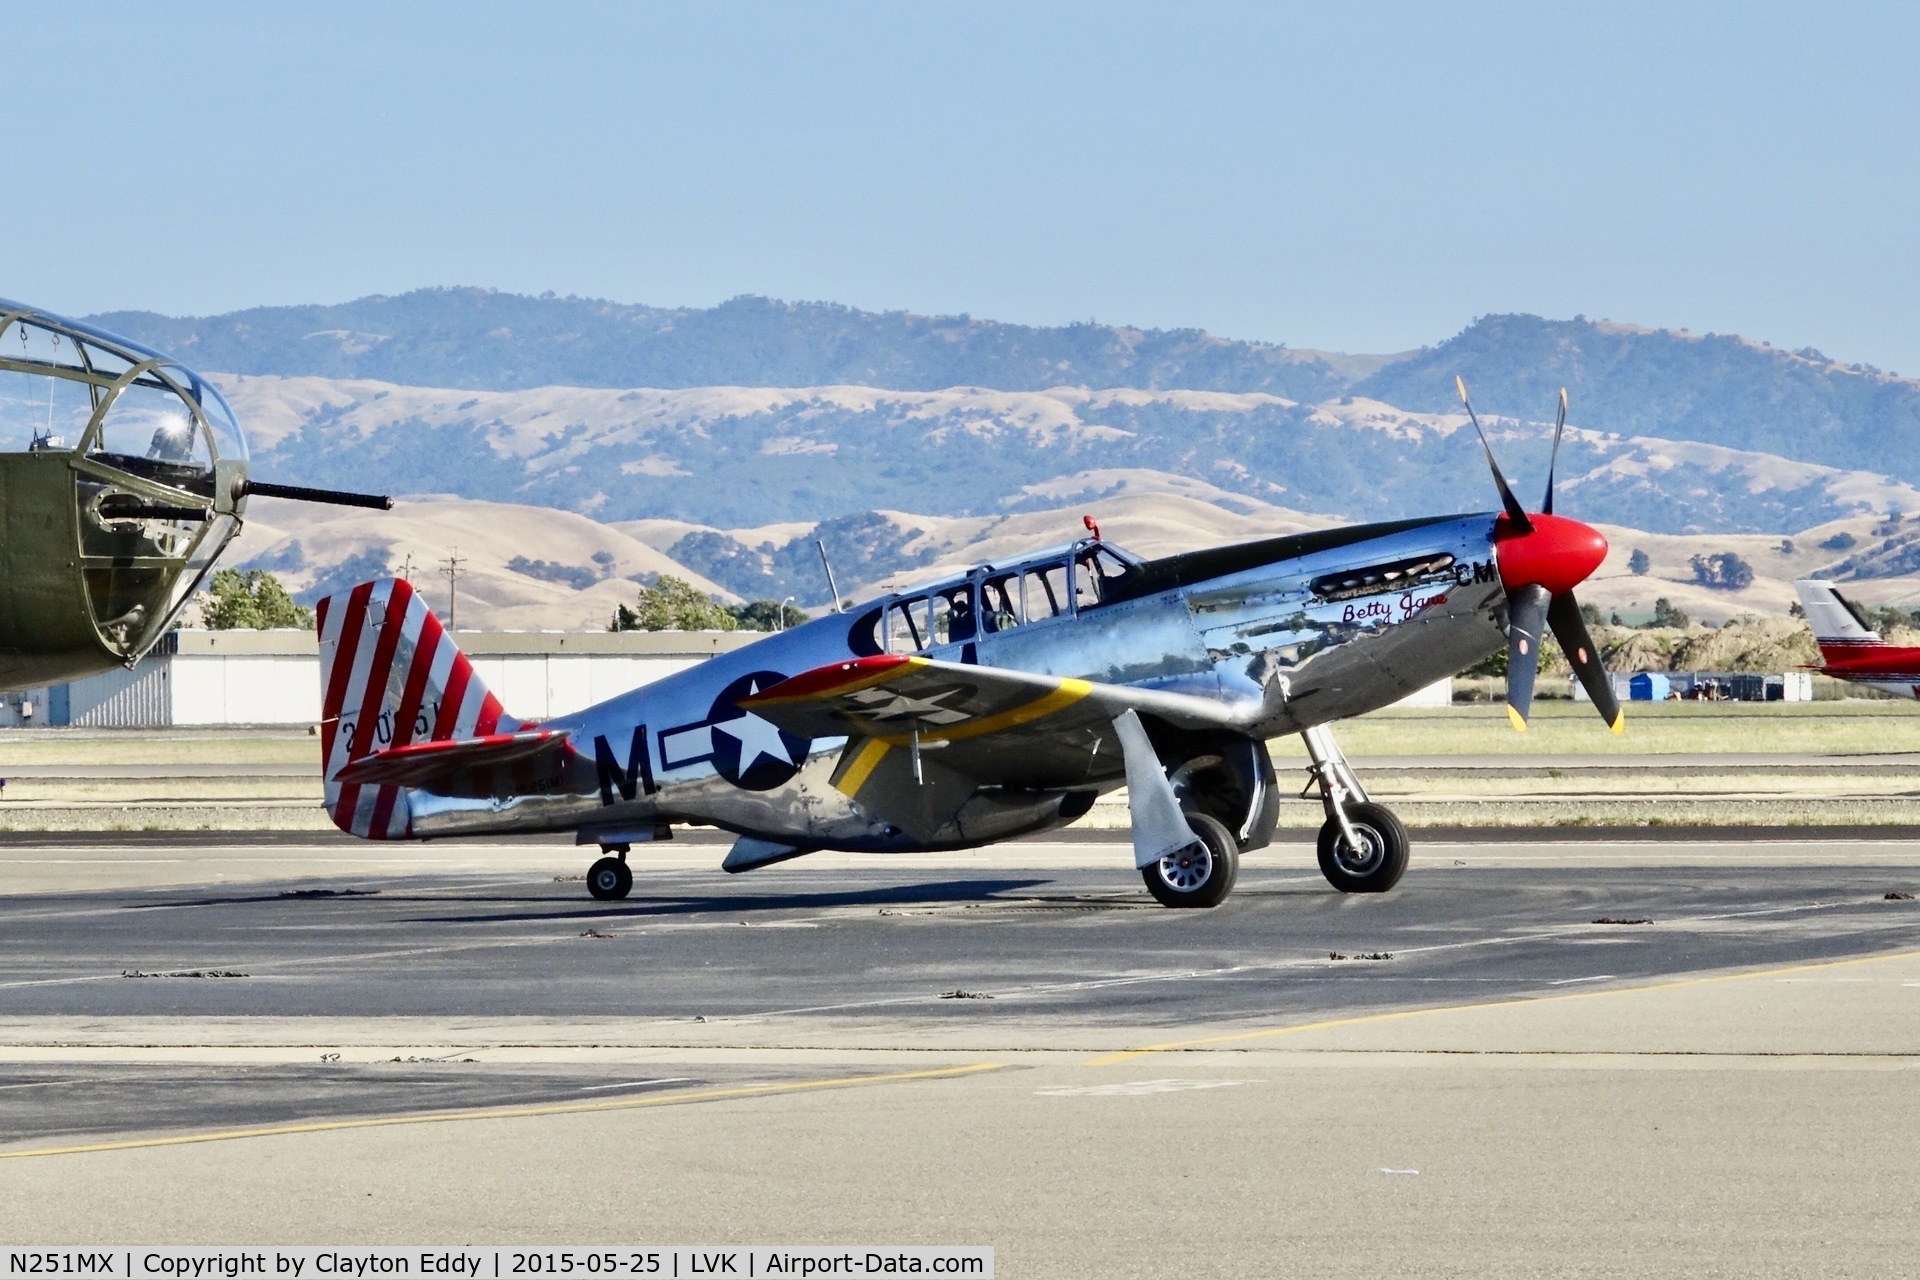 N251MX, 1943 North American P-51C-10 Mustang C/N 103-22730, Collings Foundation Livermore Airport California 2015.